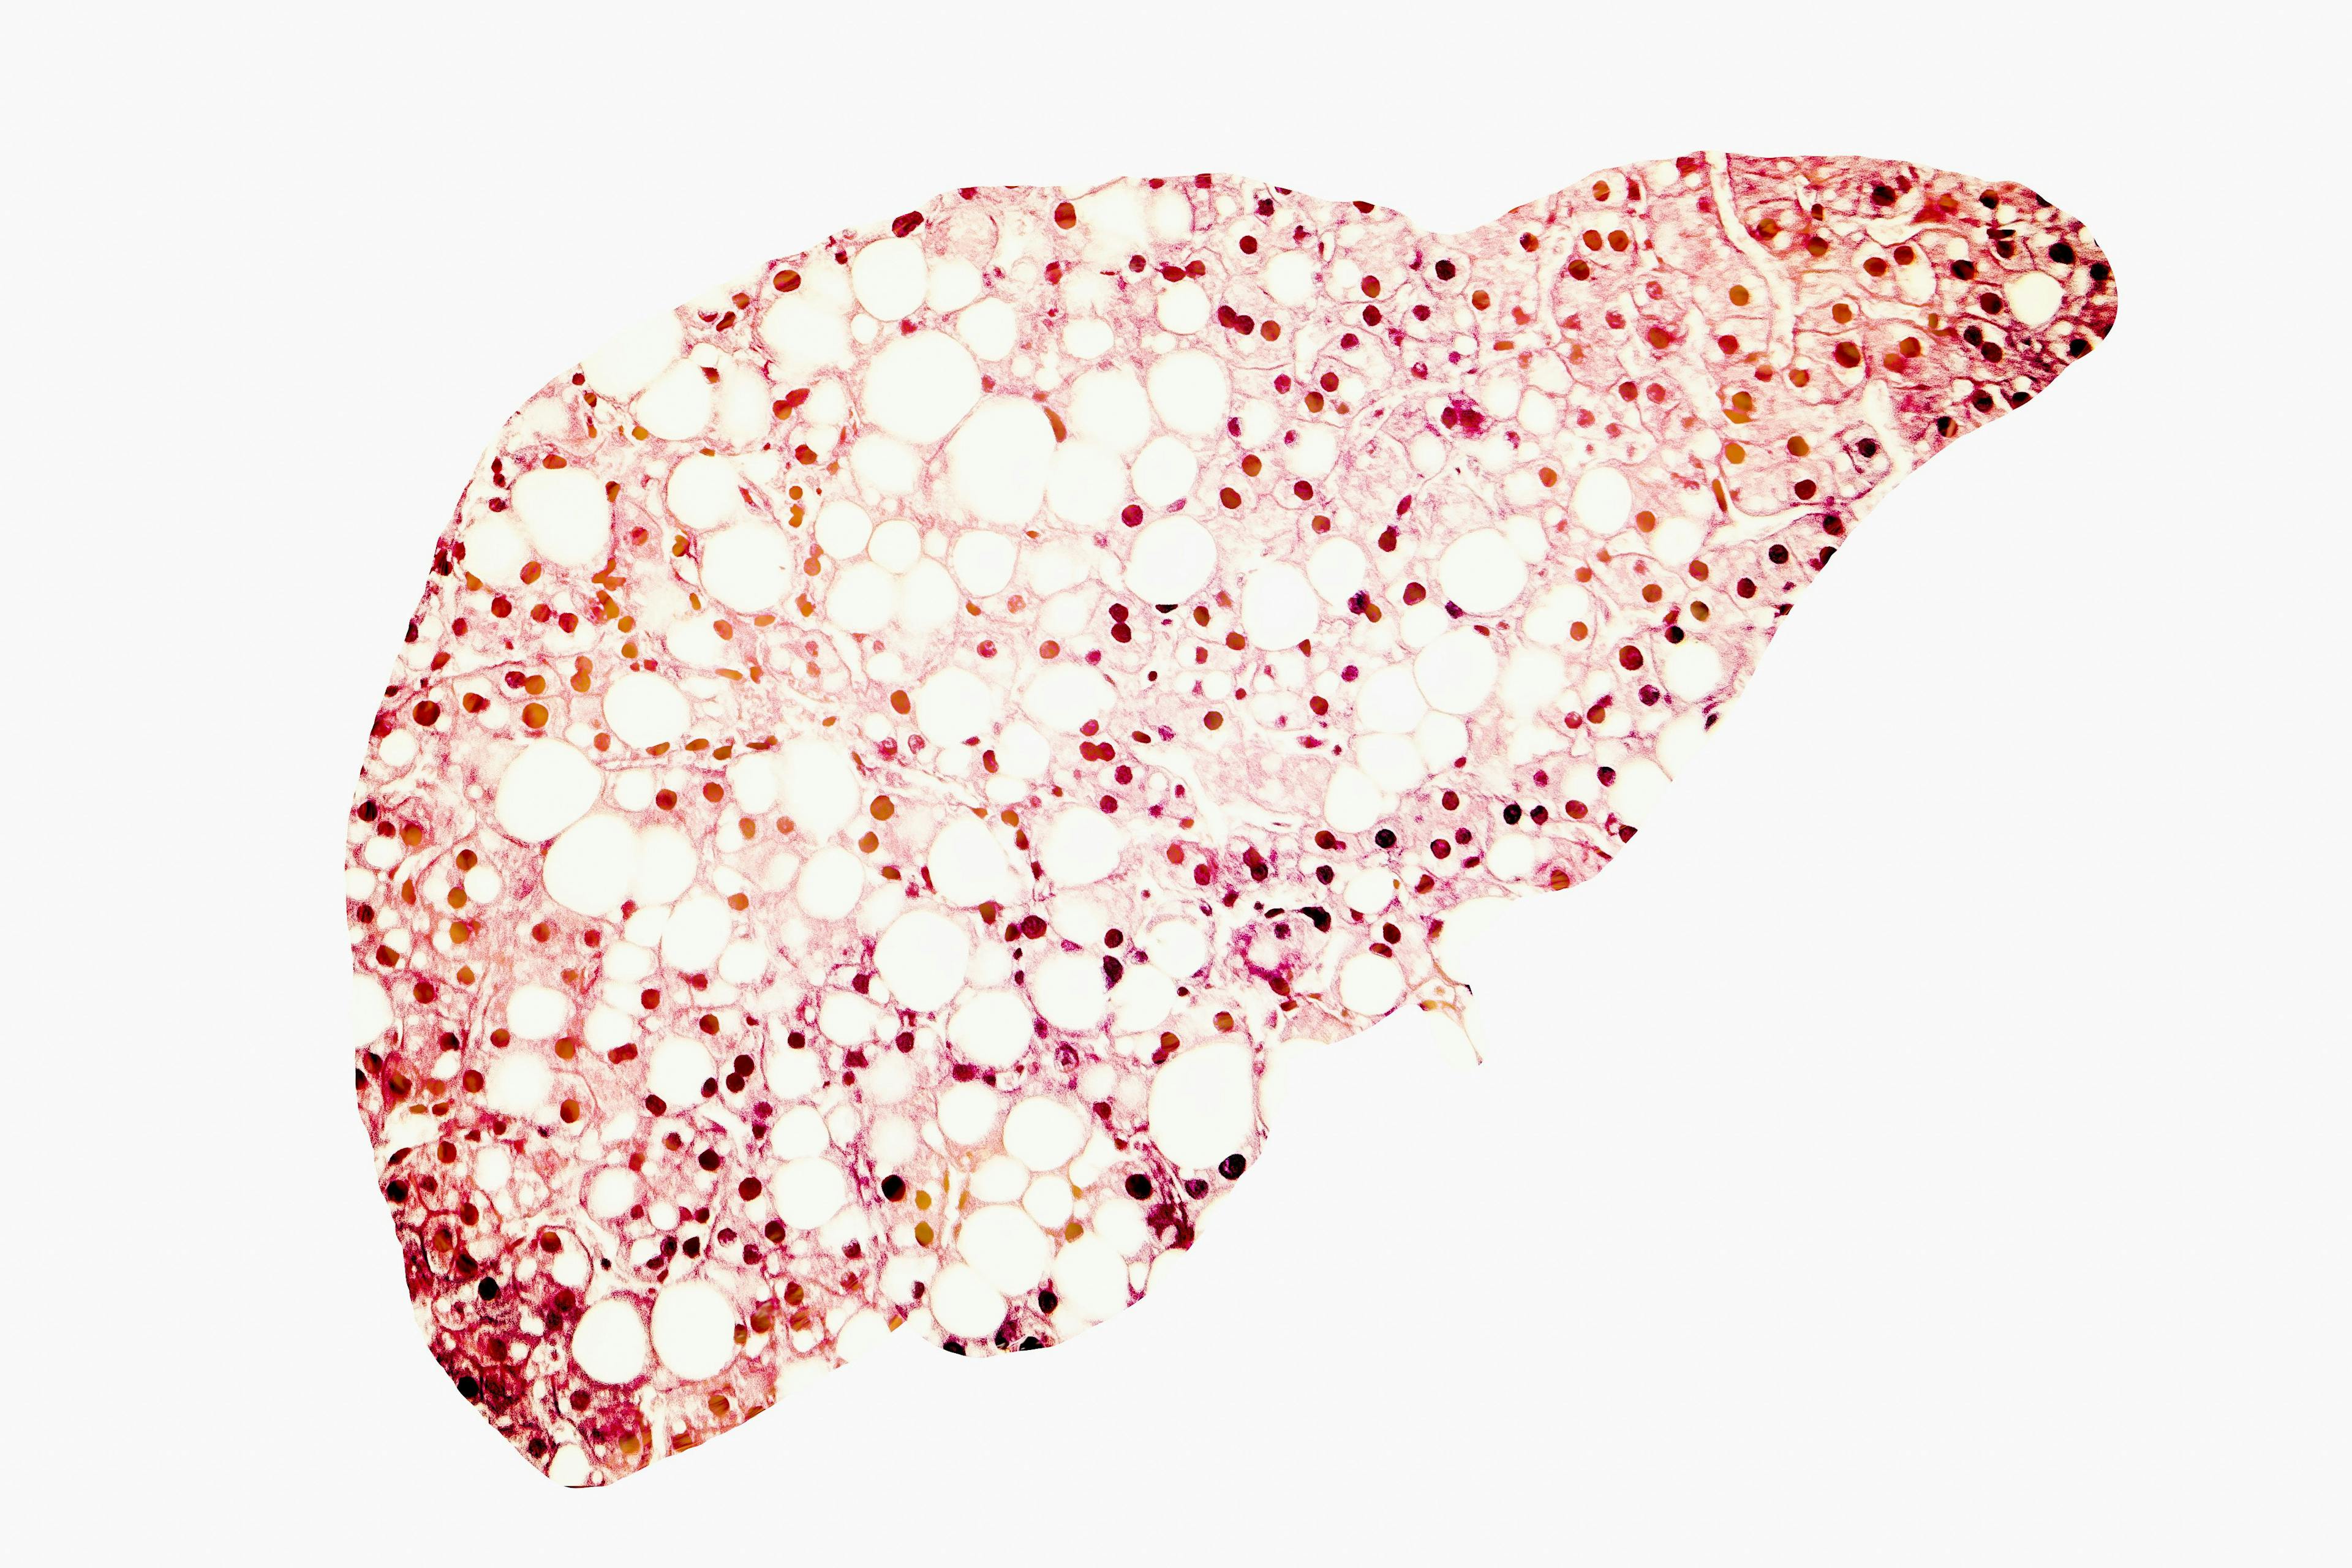 Resmetirom Safe, Well-Tolerated in Non-Alcoholic Fatty Liver Disease